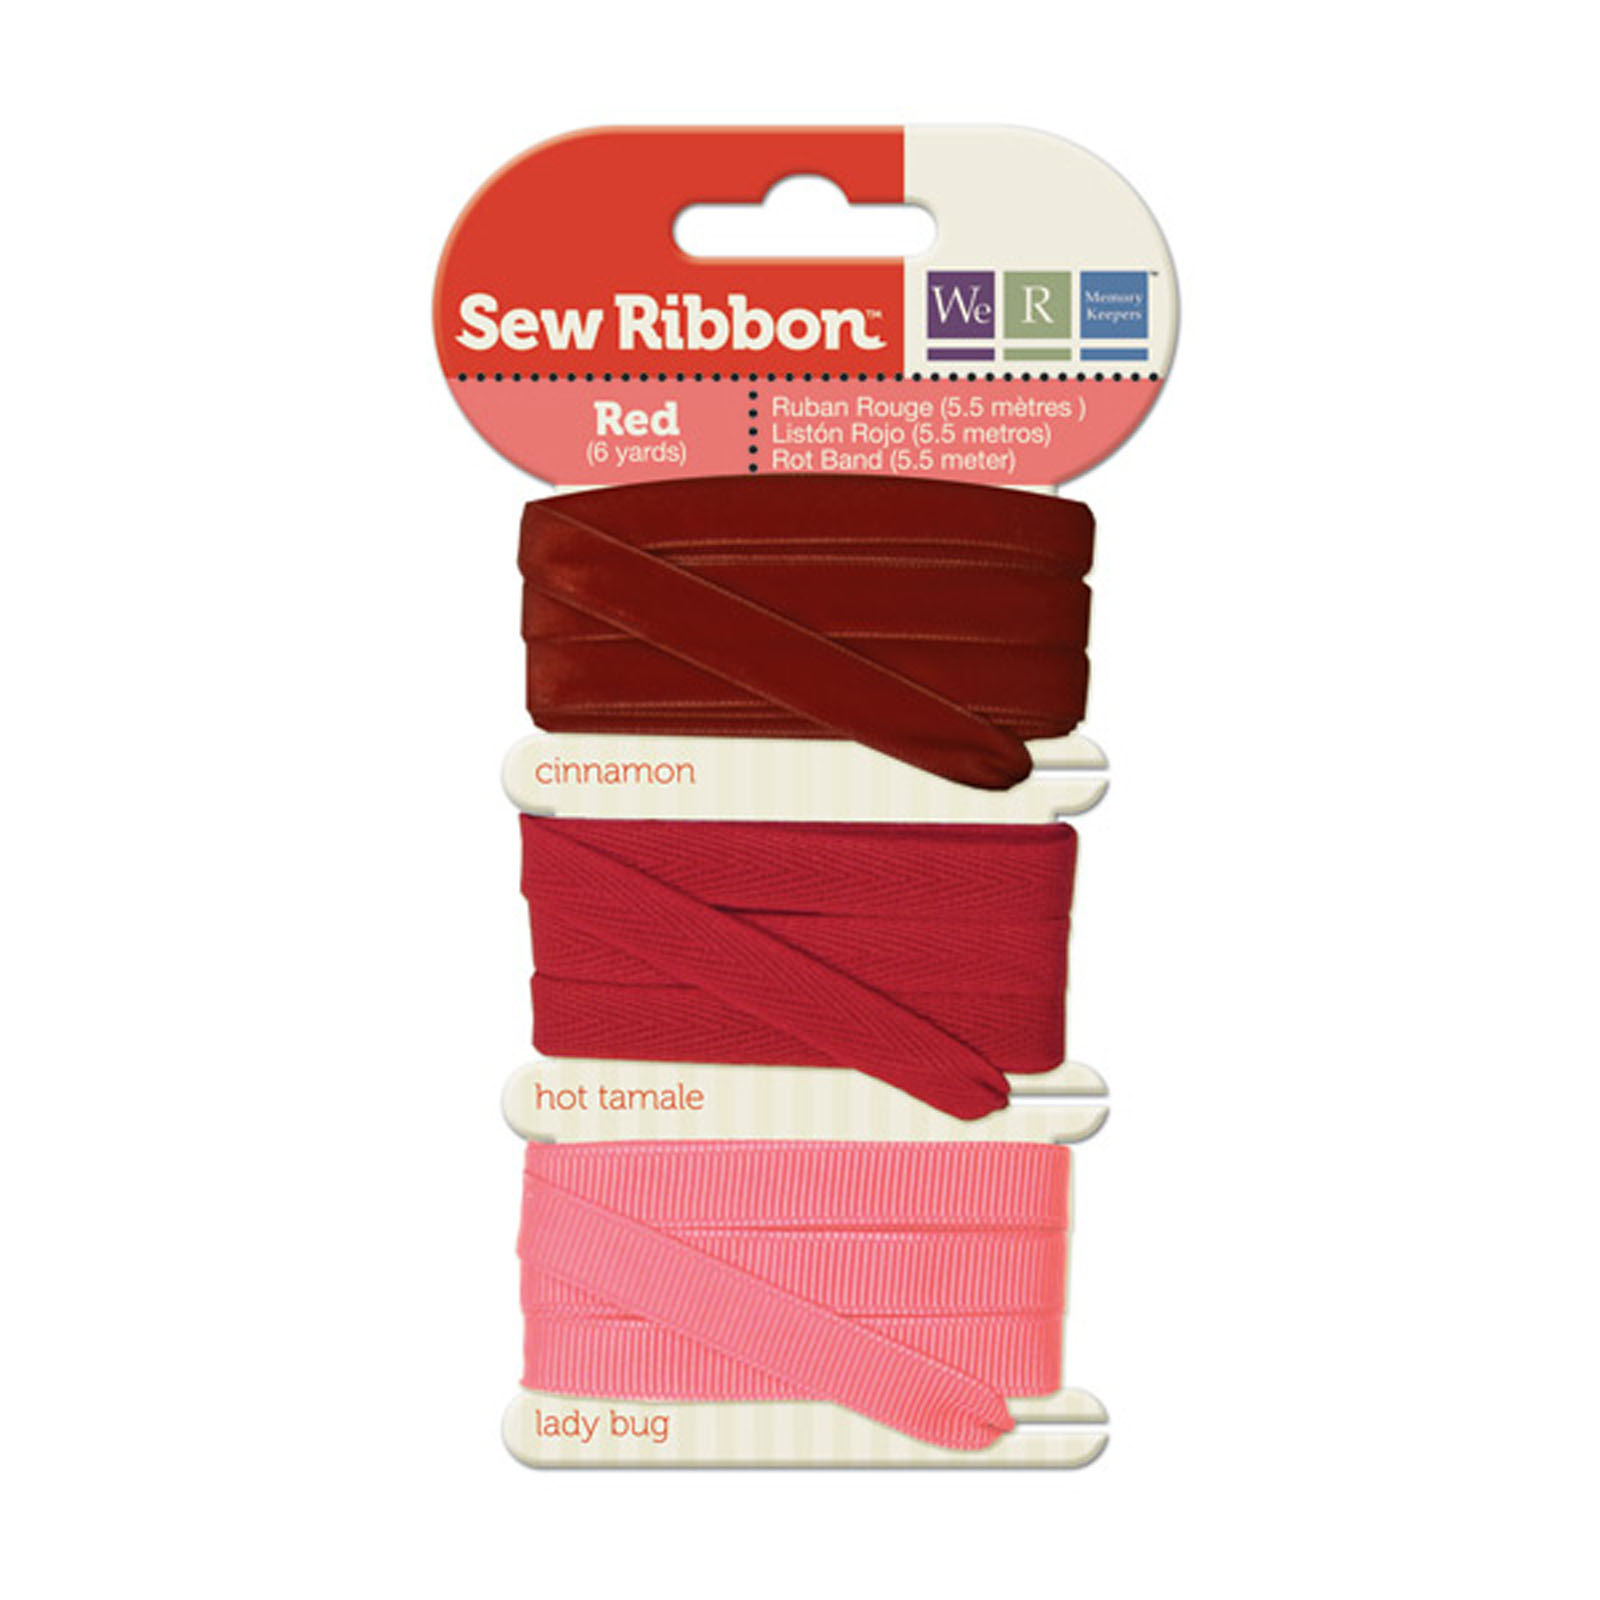 We R Makers • Sew Ribbon ribbonset 5,5m Red